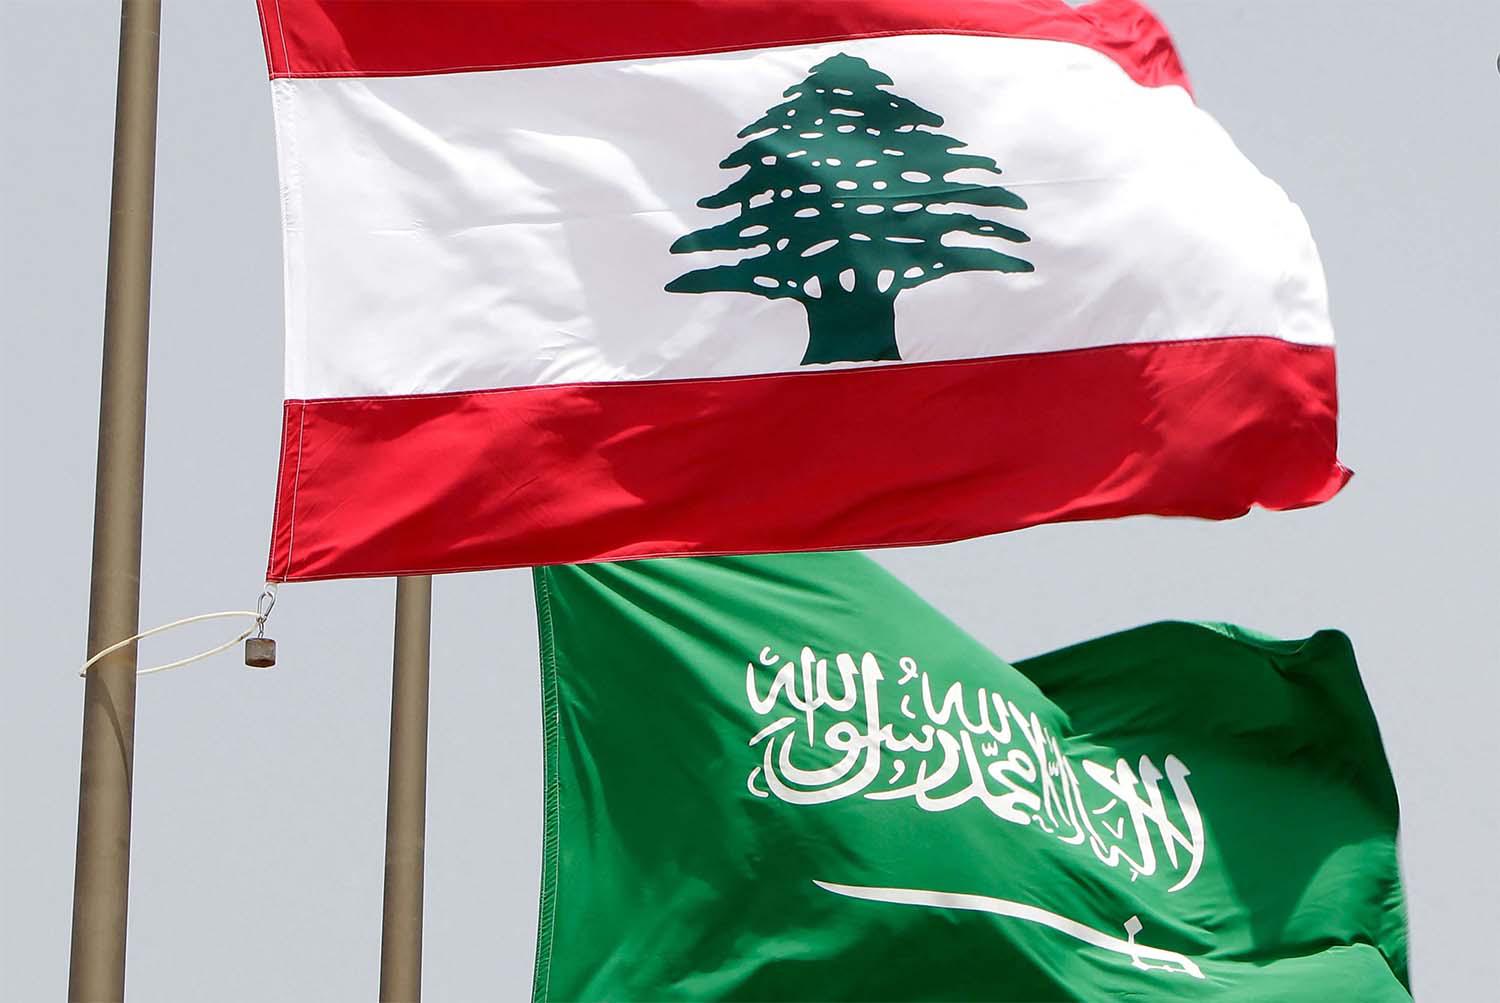 The crisis between Lebanon and Gualf Arab states is deepening